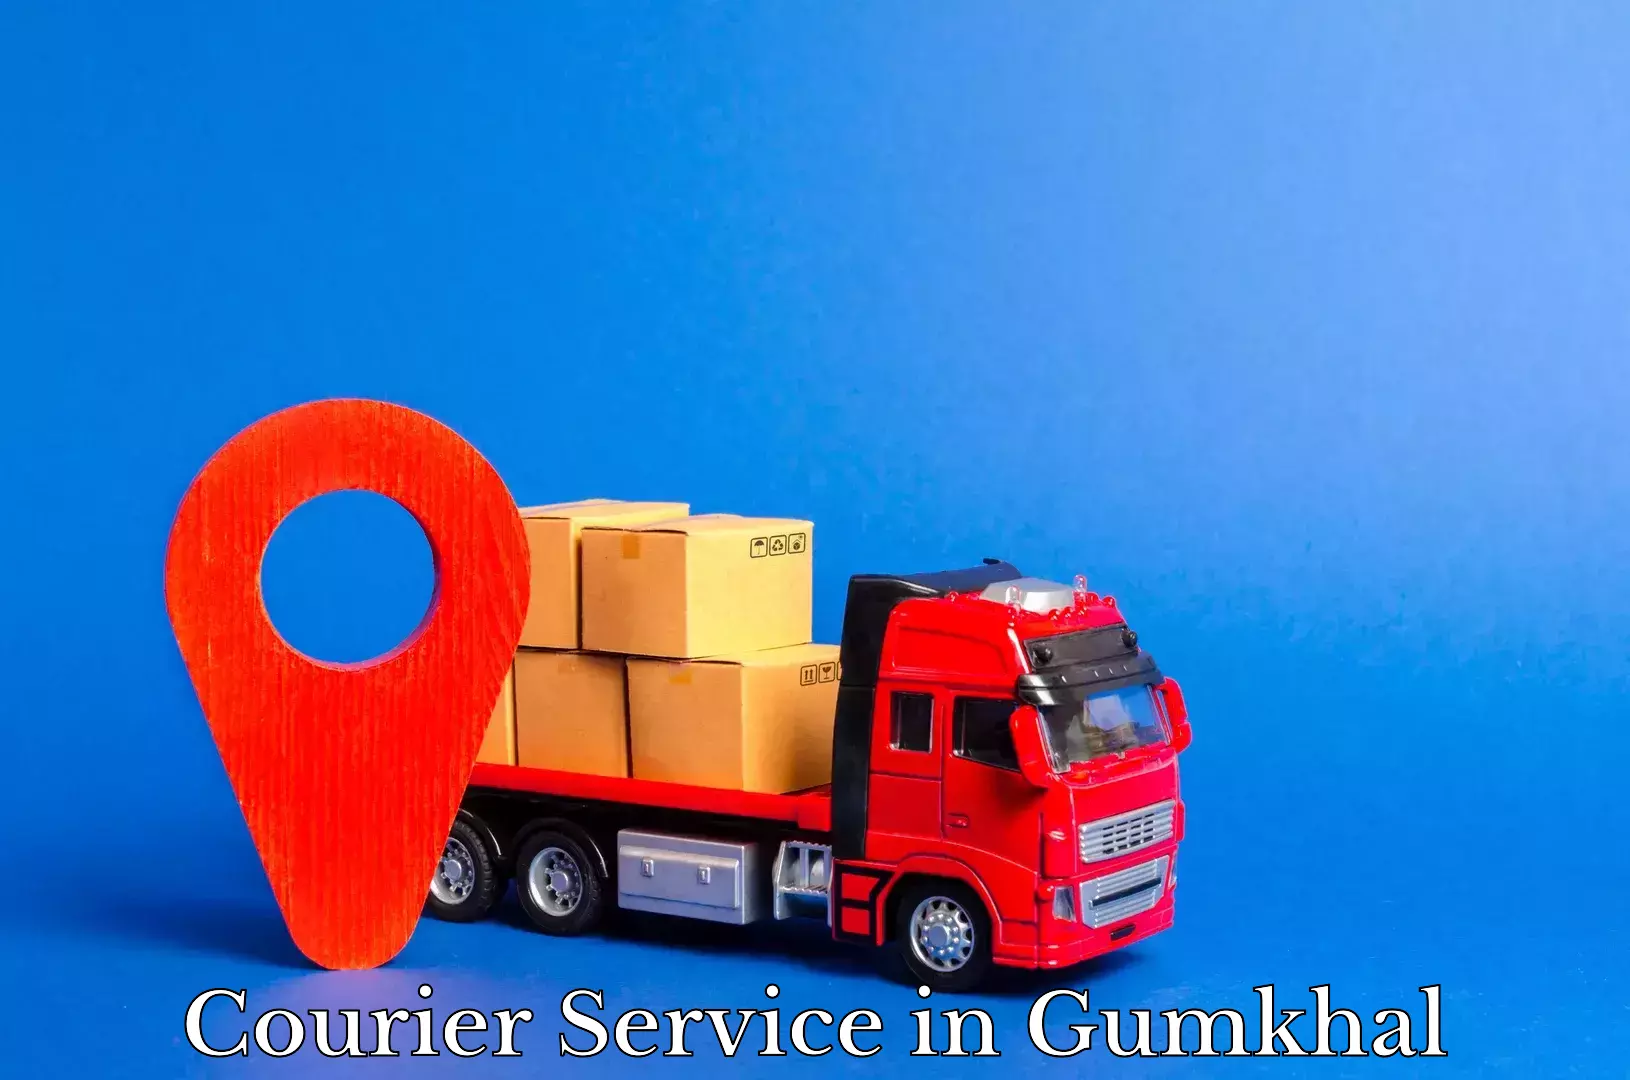 Cash on delivery service in Gumkhal